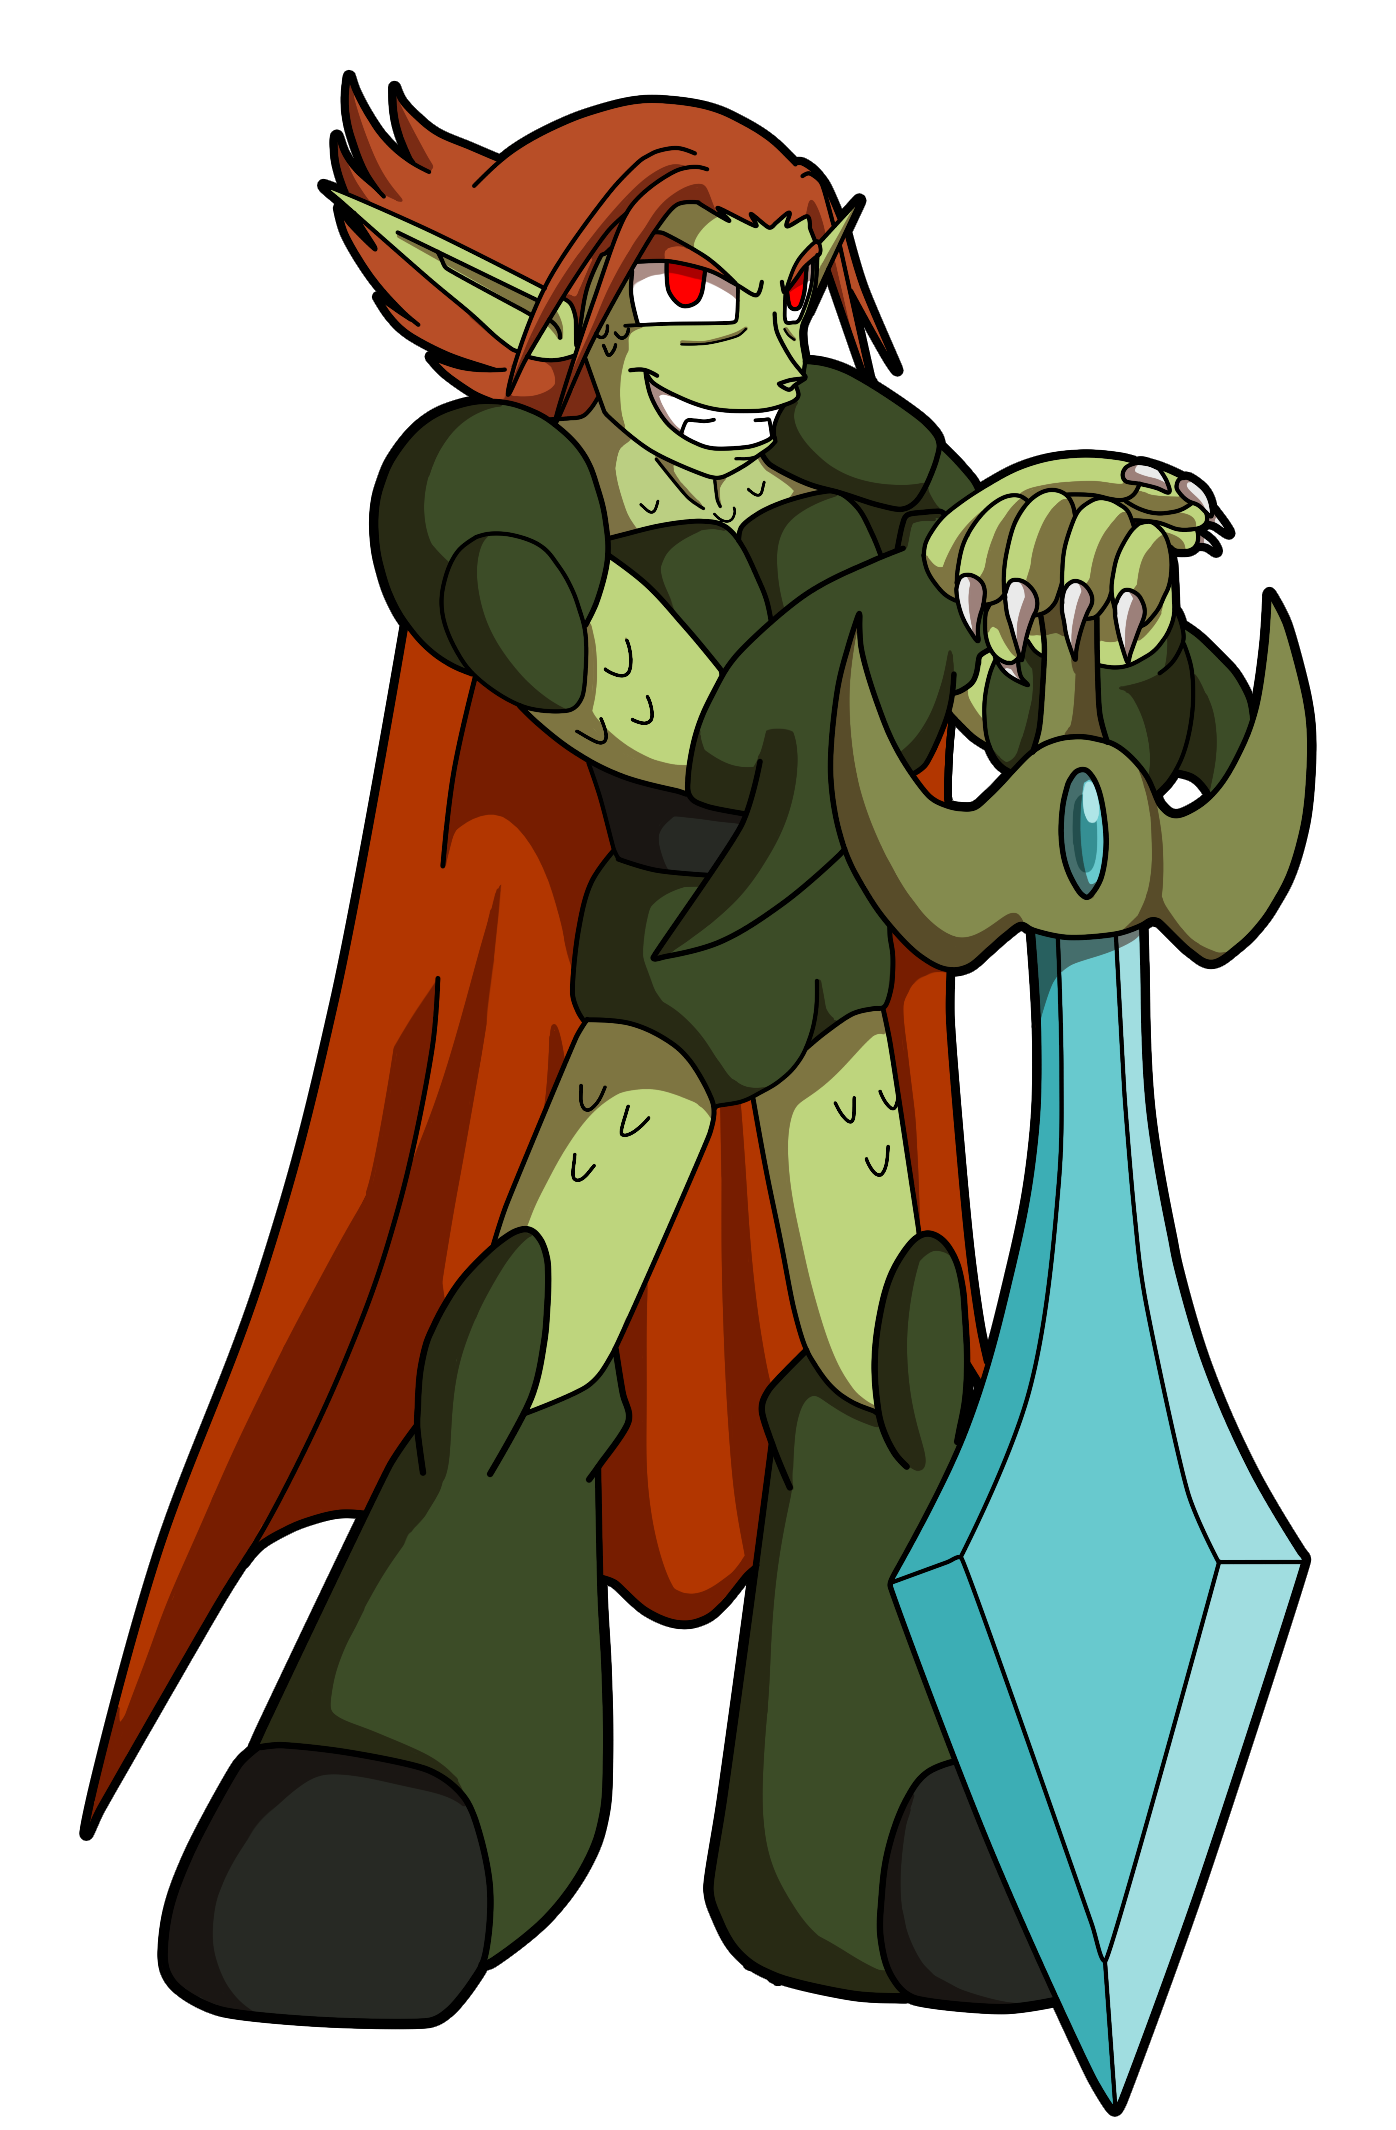 Tome_nylocke_by_kirbopher15-d53cpbb.png